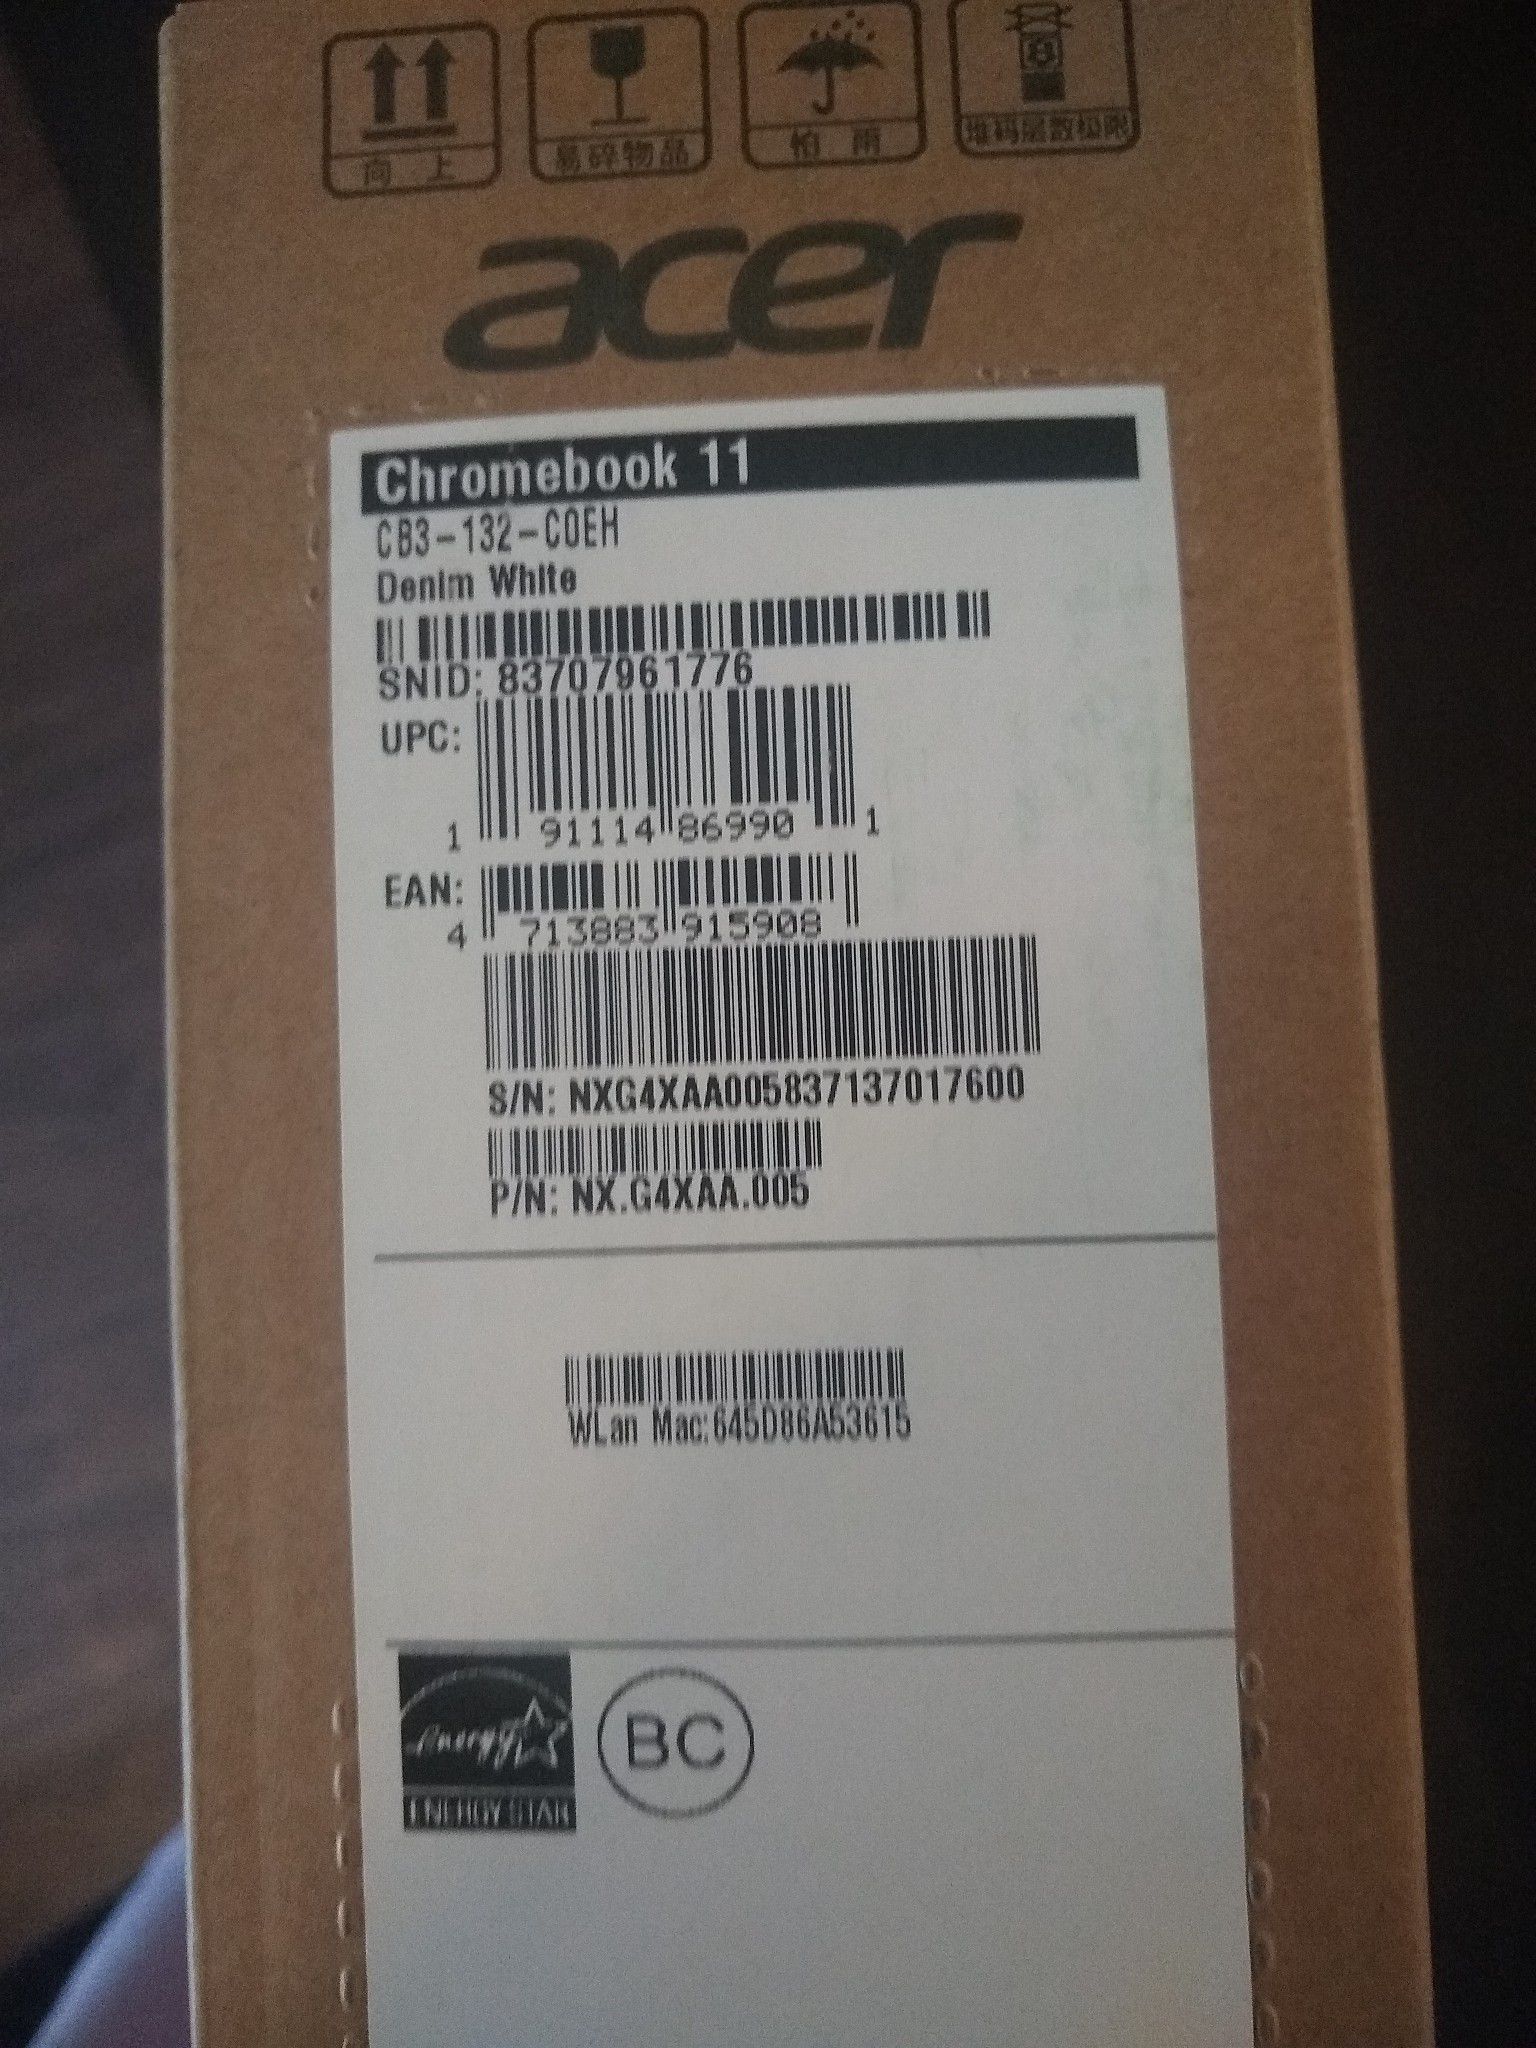 Brand New Acer Laptop Sealed in box- Acer Chromebook 11 CB3-132-COEH